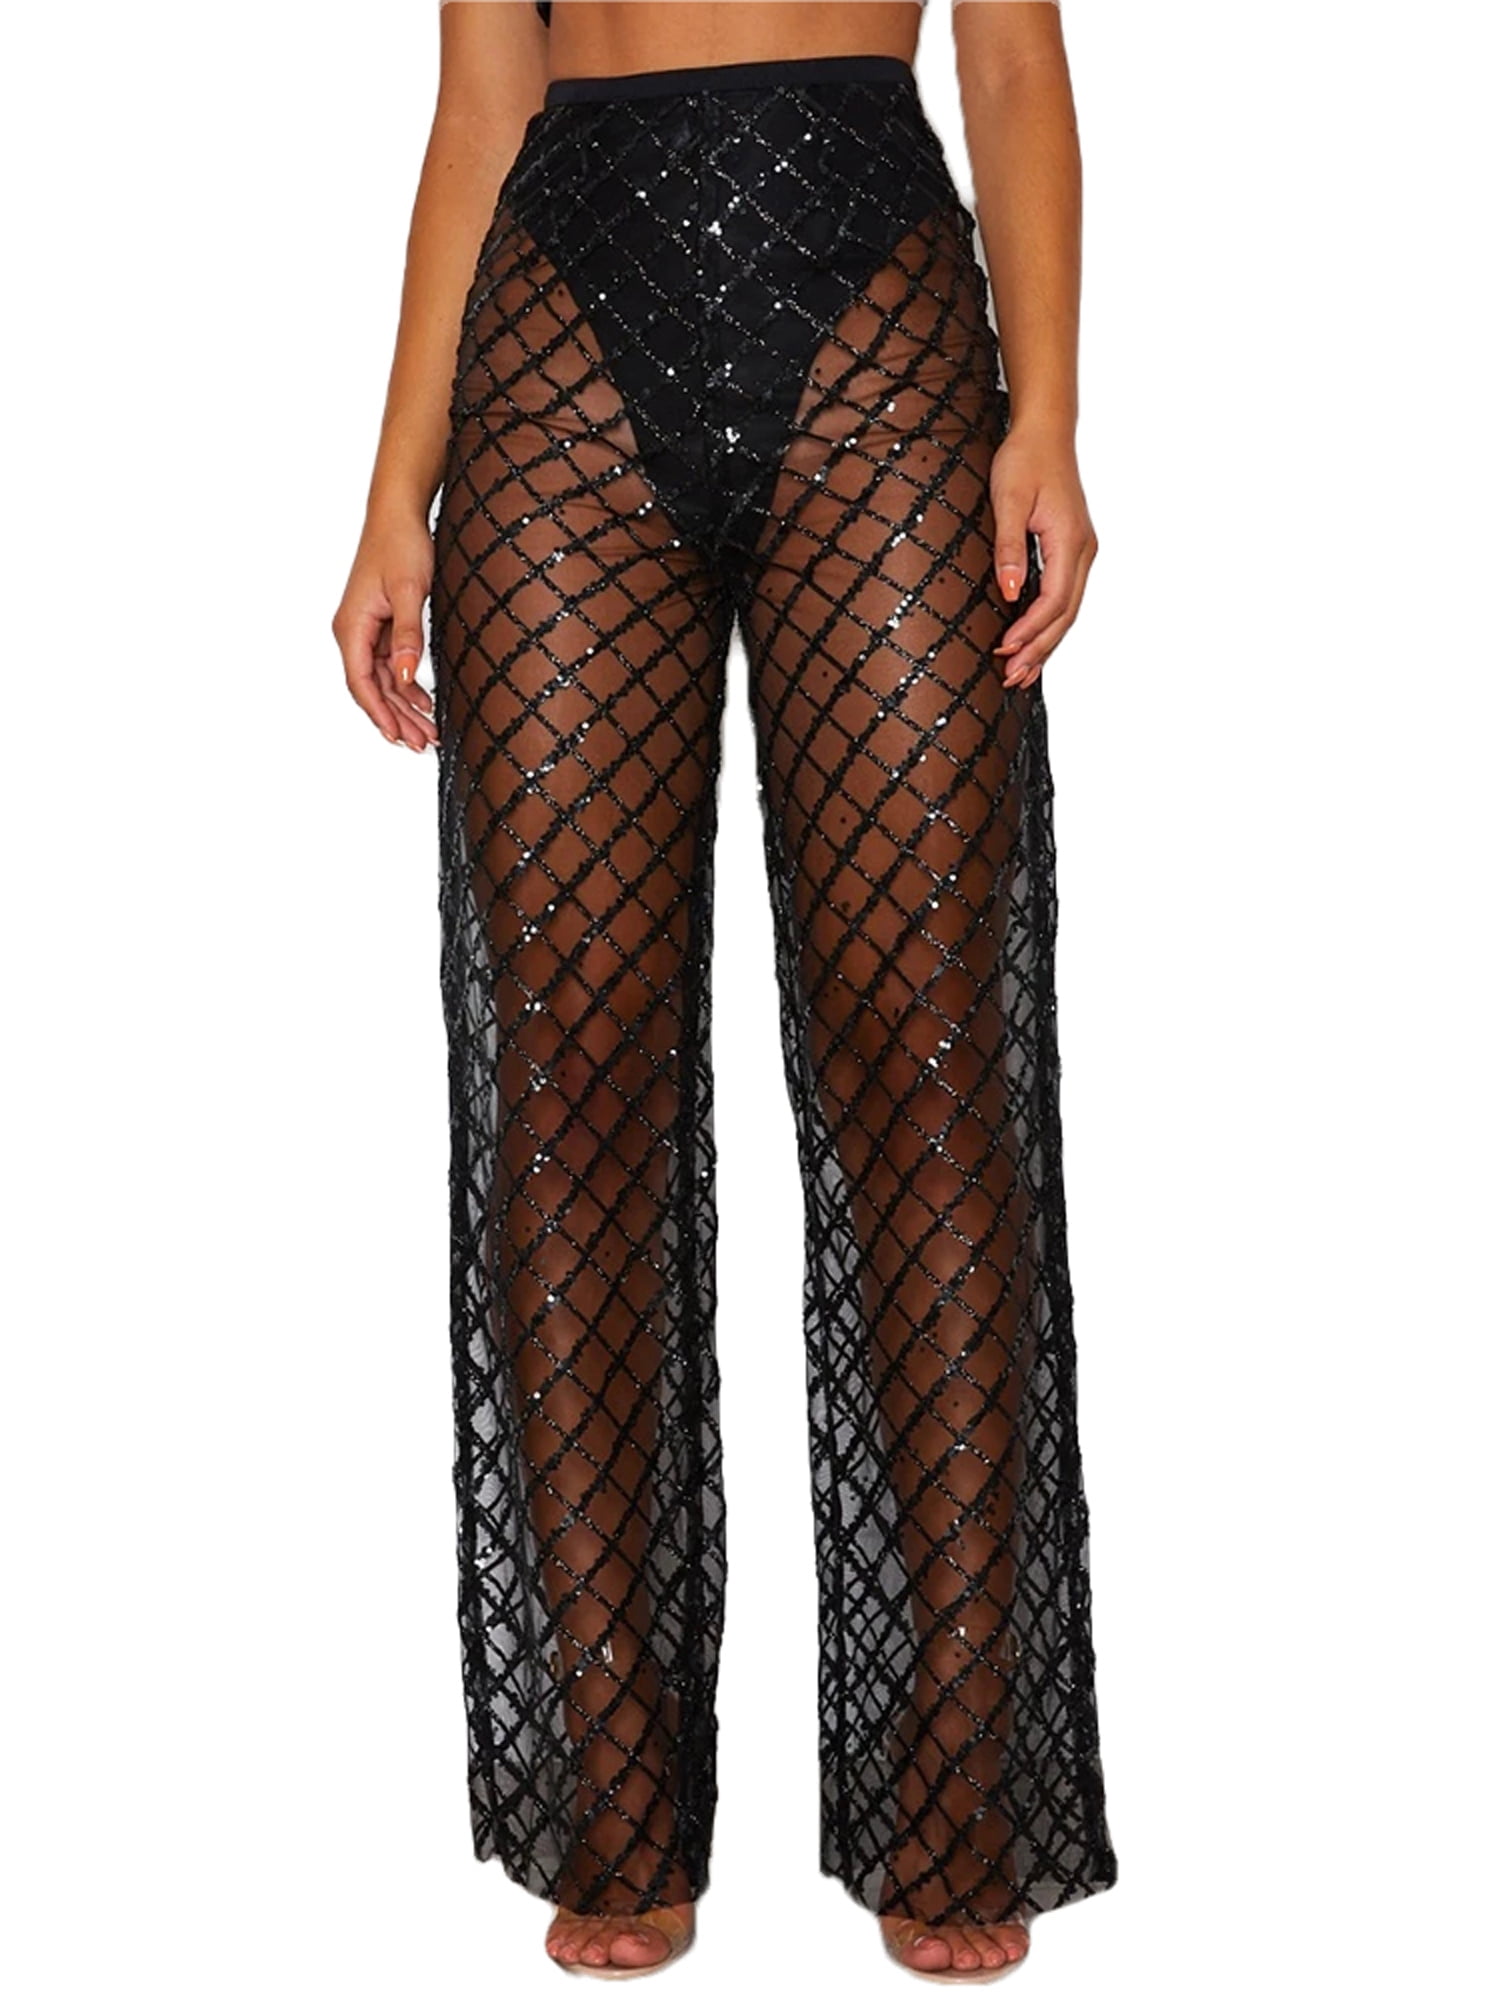 Women Hollow Out Pants Rave Mesh Sheer Pants See Through Fishnet Pants  Cover Up for Swimwear Beach